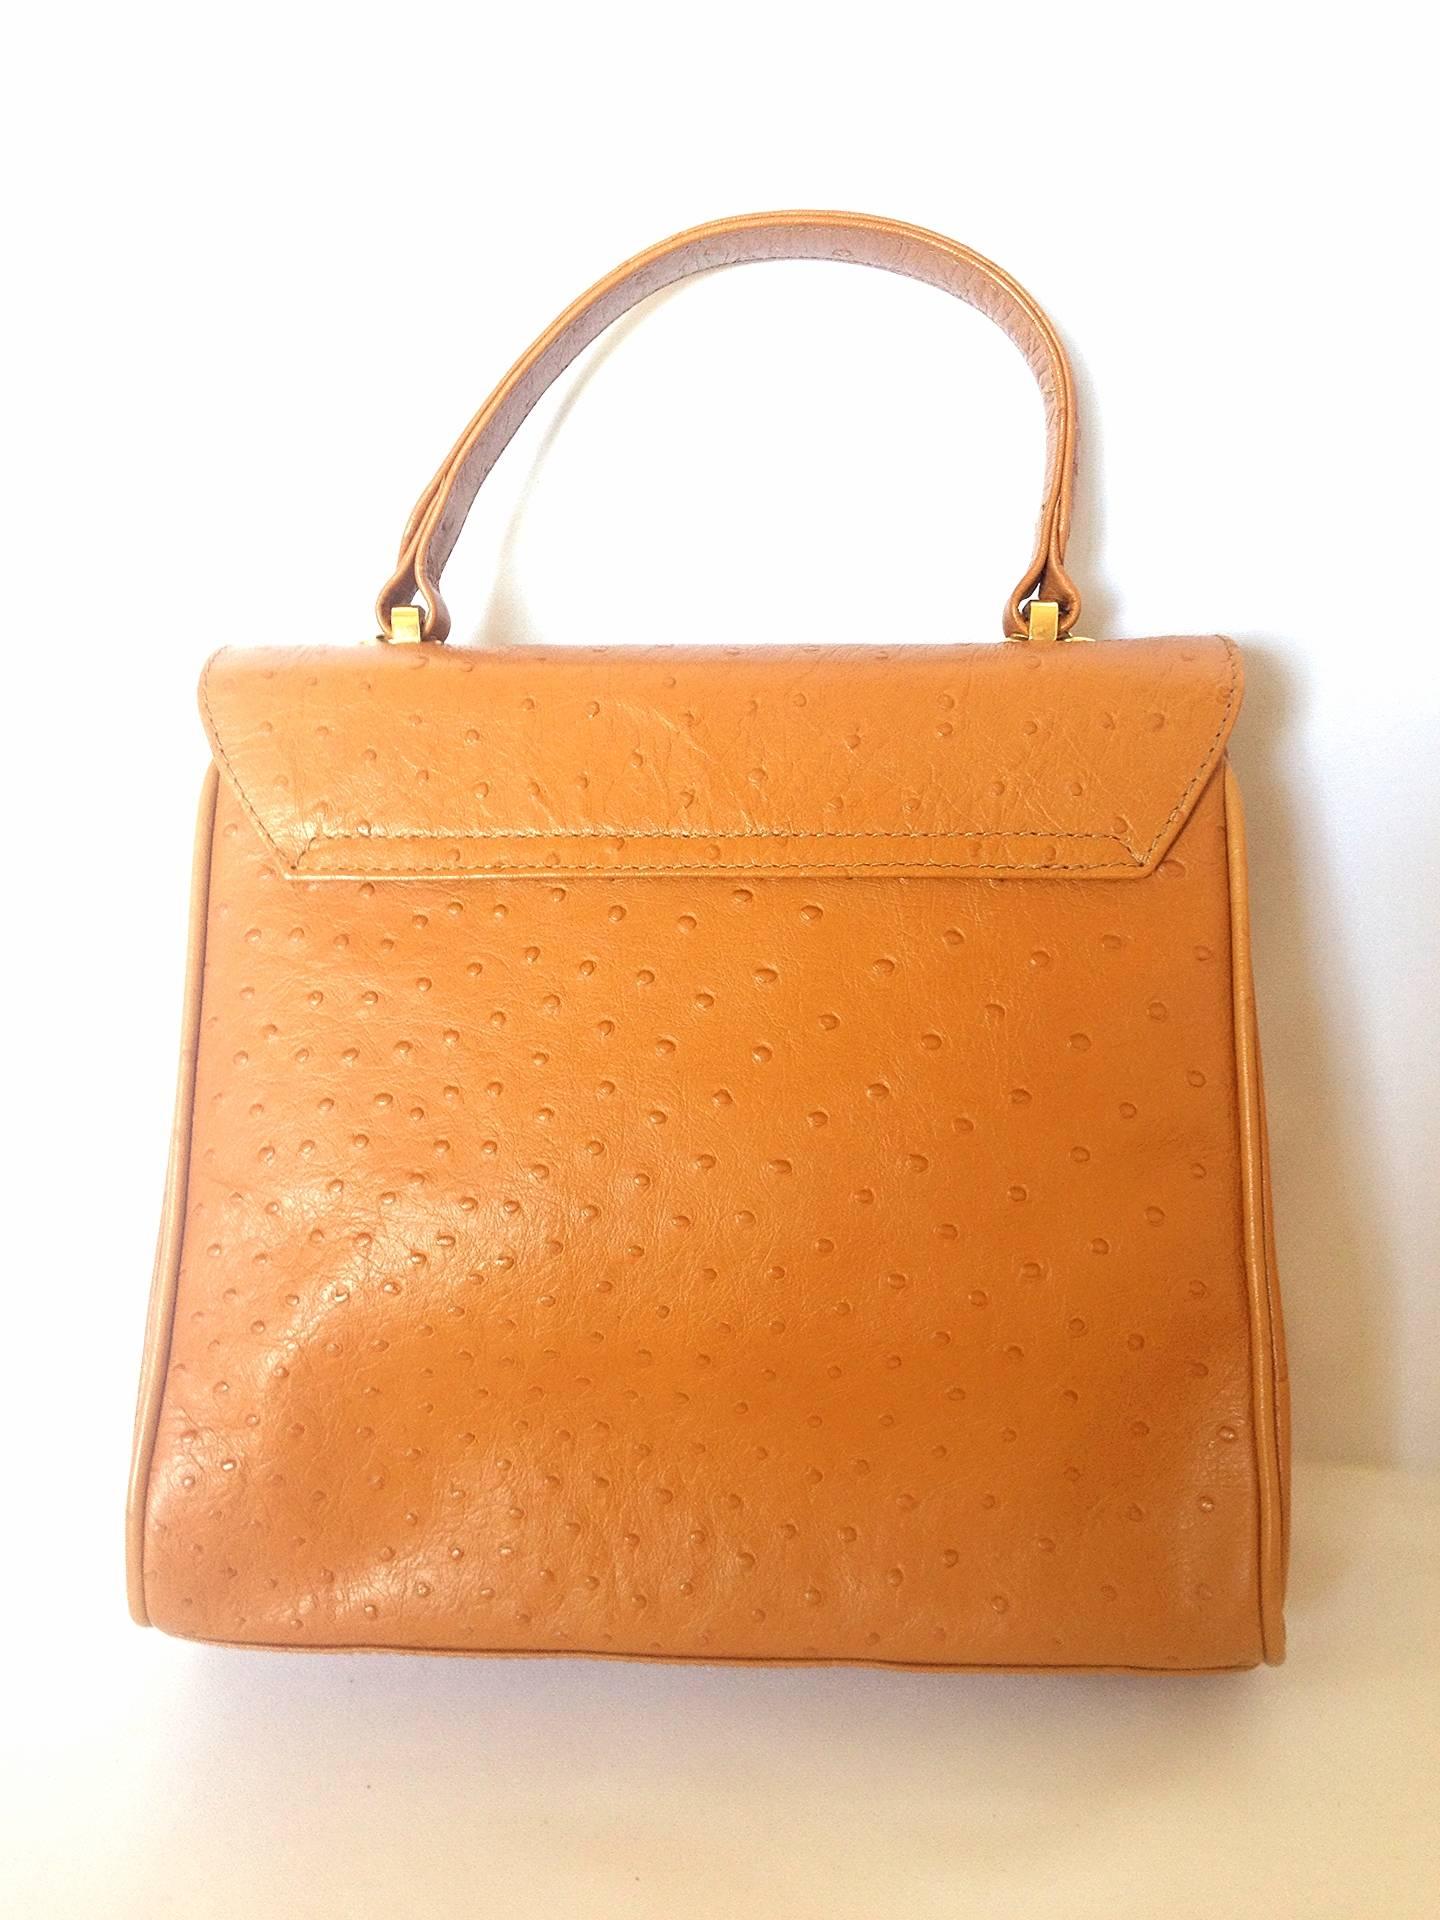 1990s. MINT. Vintage Nina Ricci tan brown ostrich-embossed leather handbag purse with golden motif at closure. Masterpiece by Maroquinerie.

Introducing a vintage Nina Ricci handbag in tanned brown leather with ostrich-embossed design.
Masterpiece